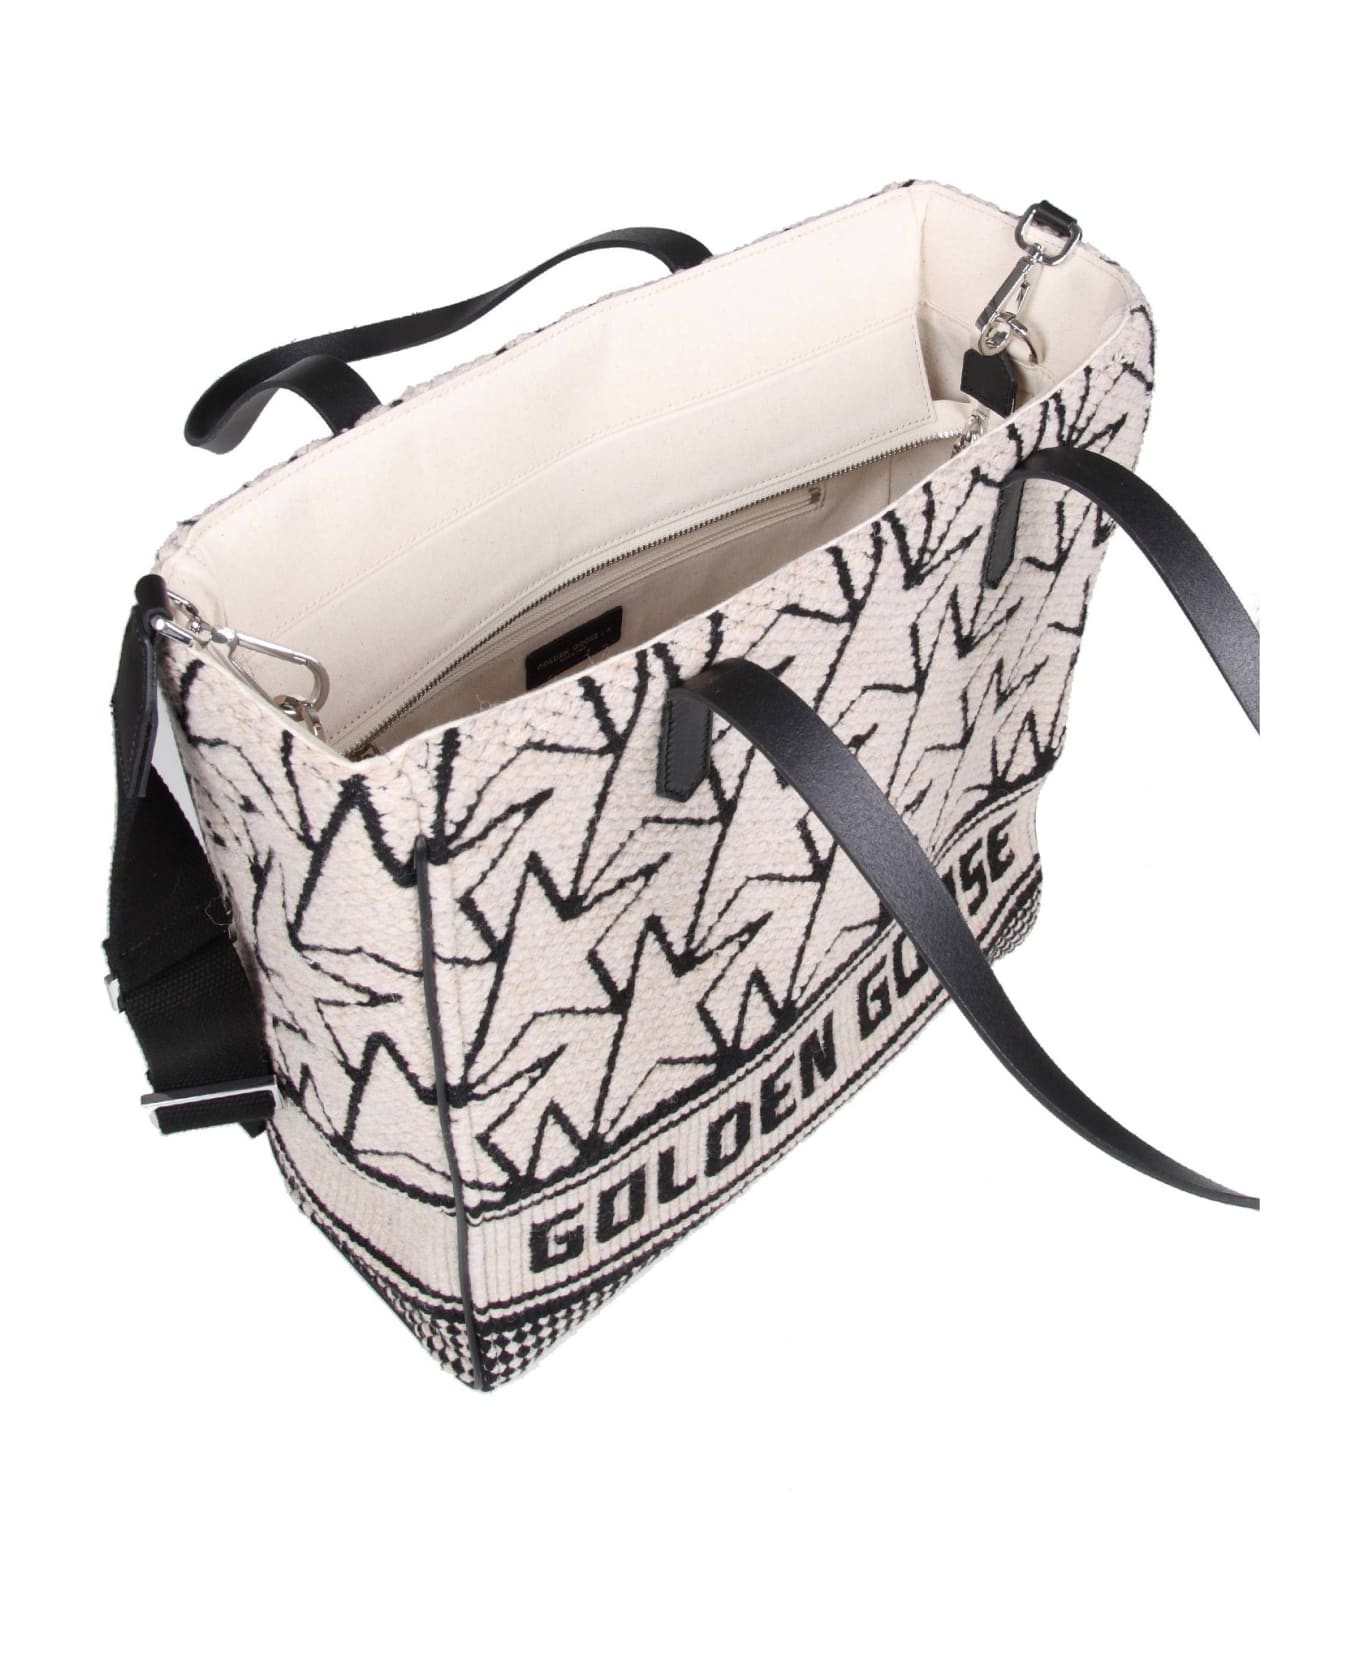 Golden Goose California Bag In Cotton And Leather